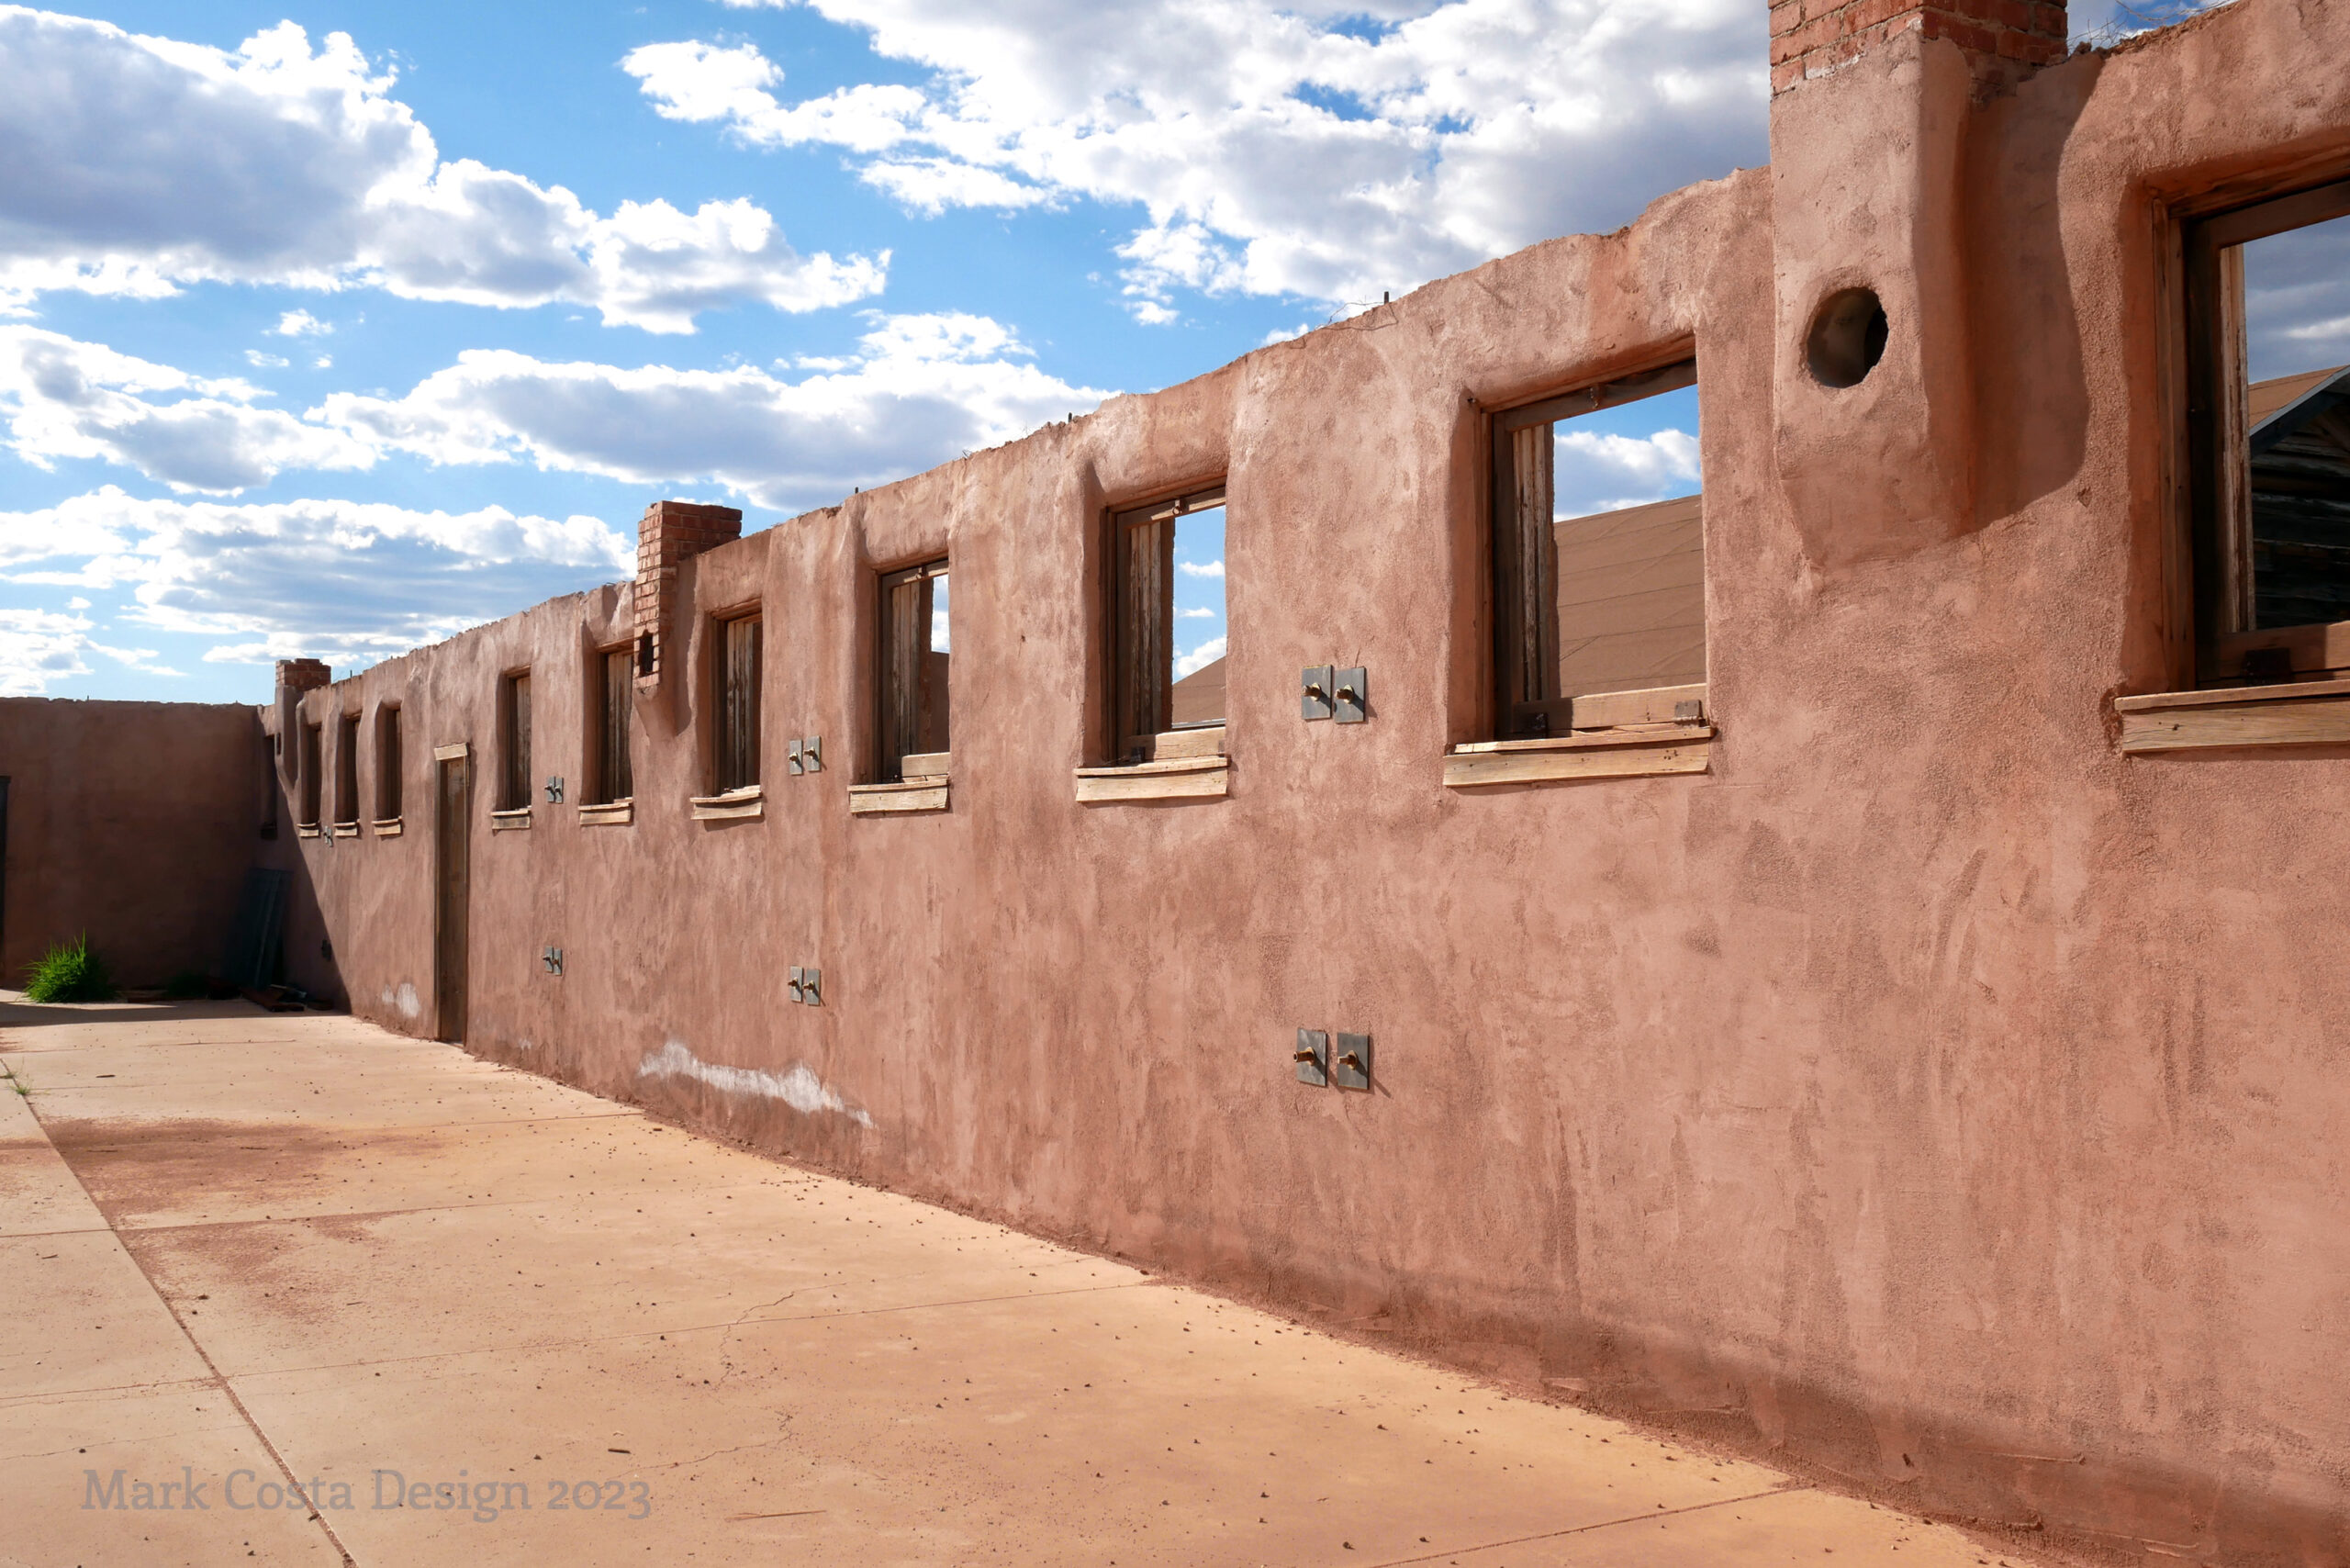 “We needed a recipe so we could reverse-engineer the plaster and duplicate it," says Mike Normand, Construction Project Manager for the City of Bisbee, Ariz. Photo courtesy Mark Costa